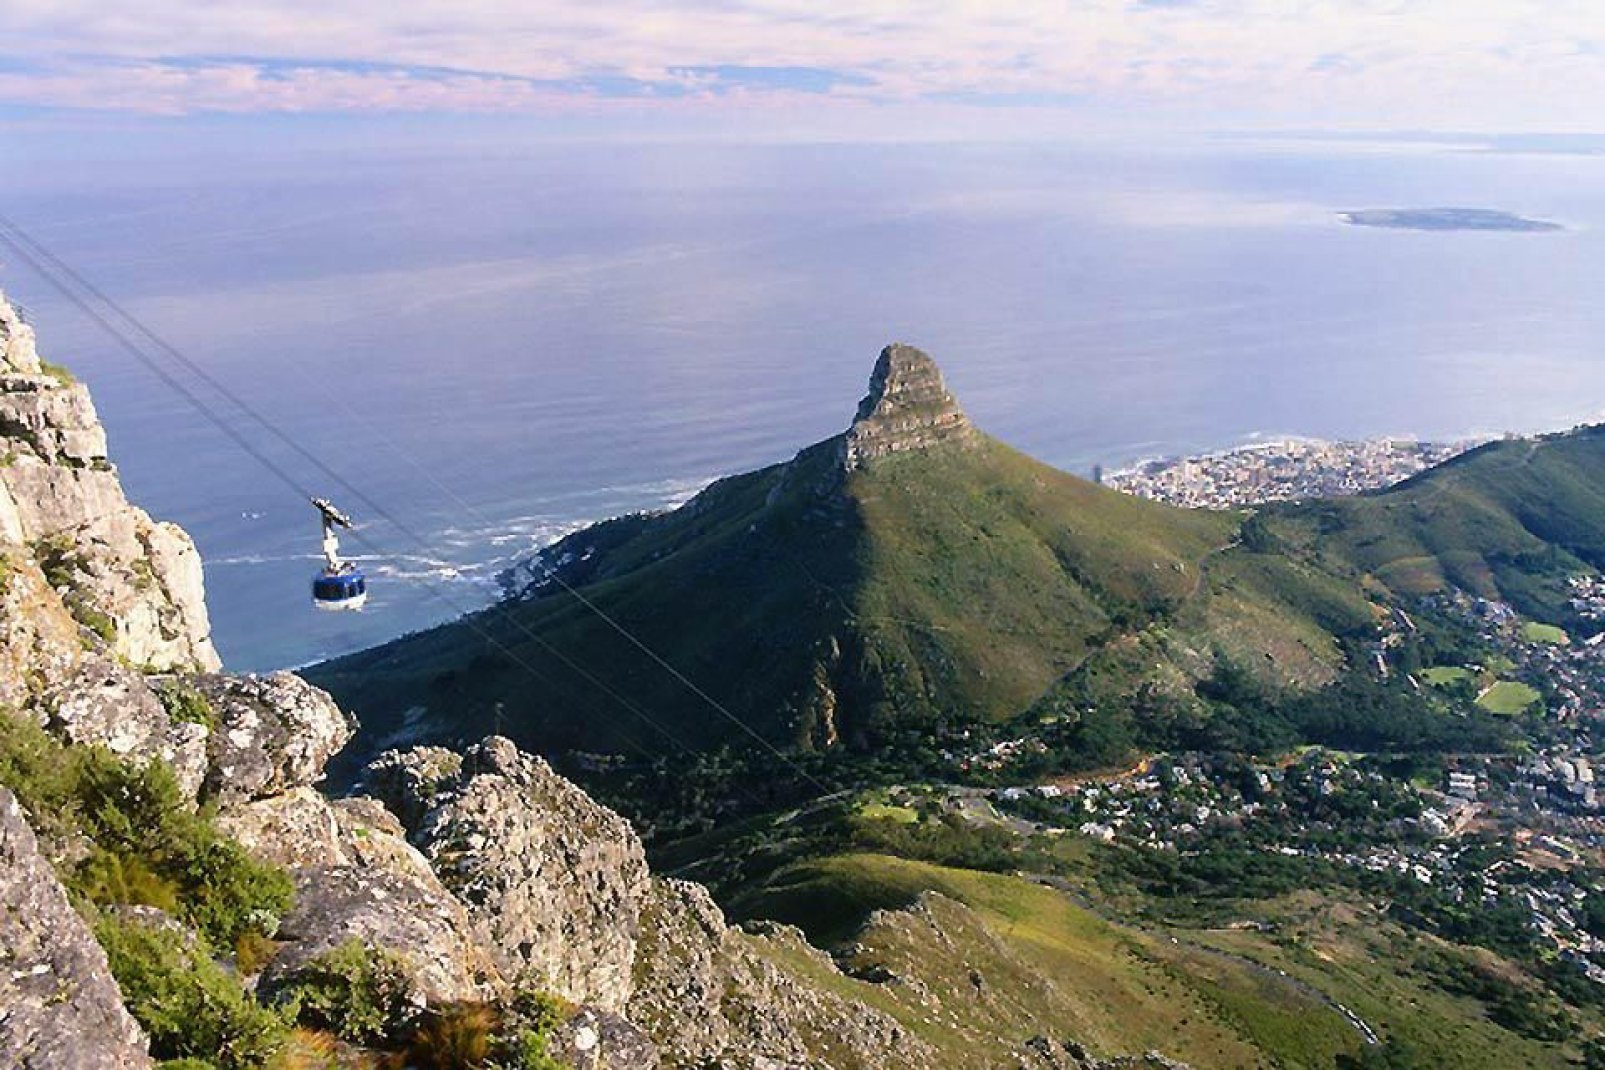 The city takes its name from the Cape of Good Hope, which is some 30 miles to the south of the historical centre.